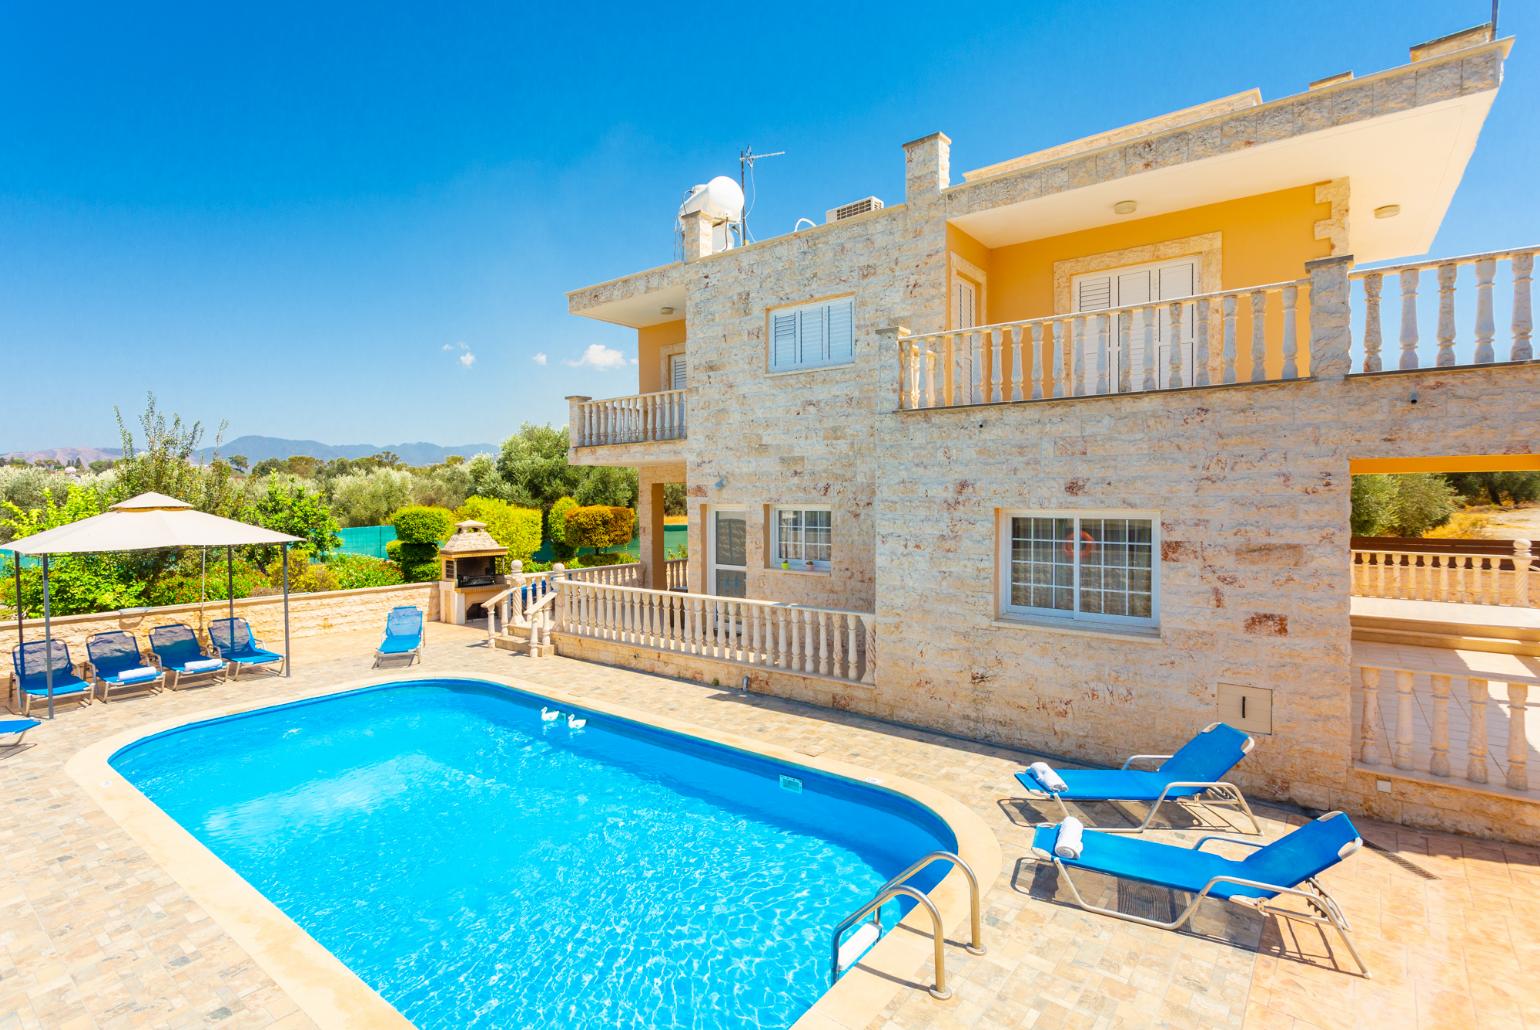 ,Beautiful villa with private pool, terrace, and large garden